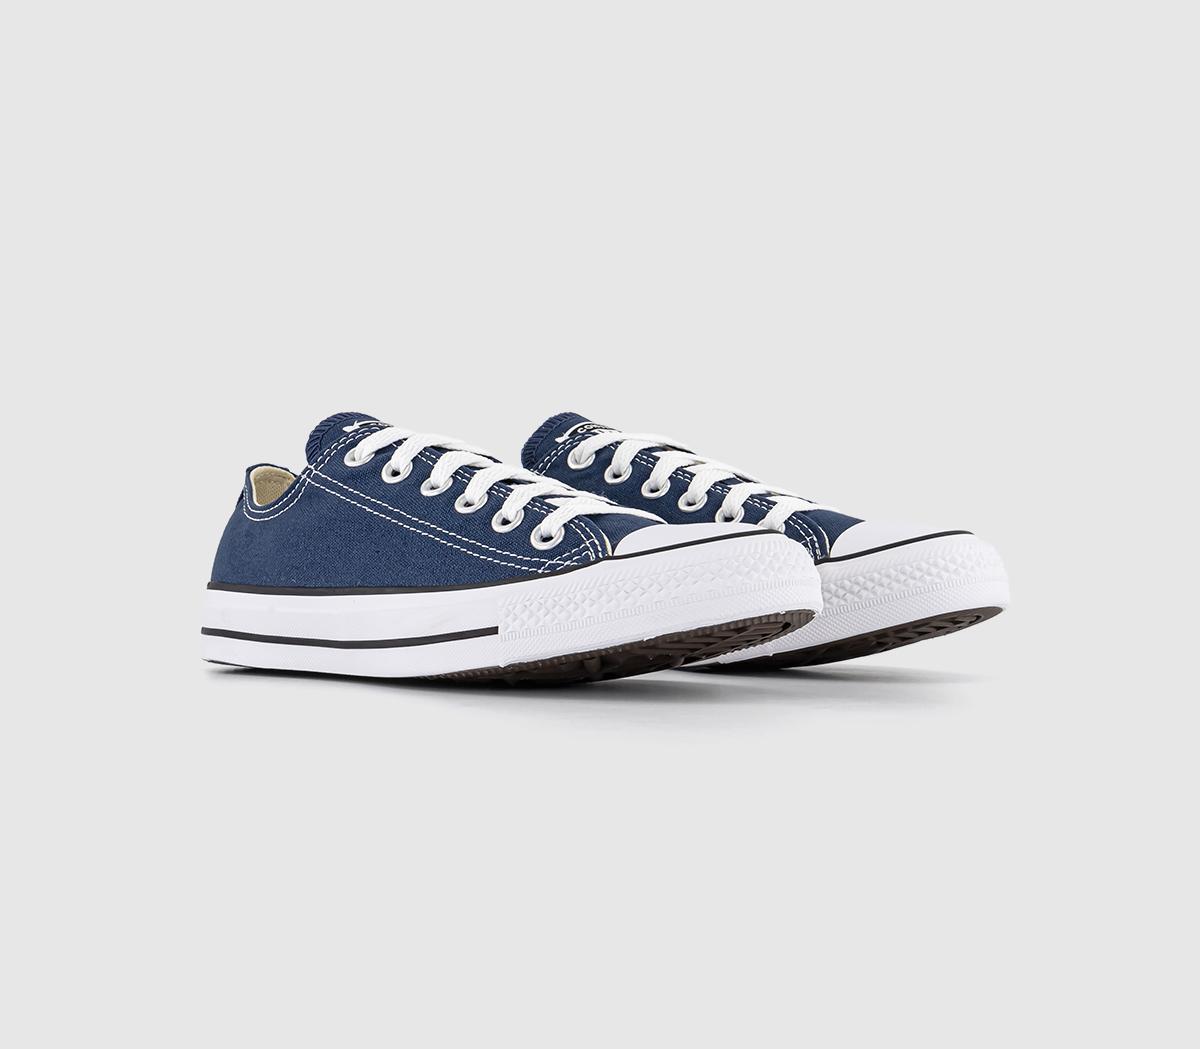 Converse Mens All Star Low Navy Canvas Trainers Blue/White, 9.5